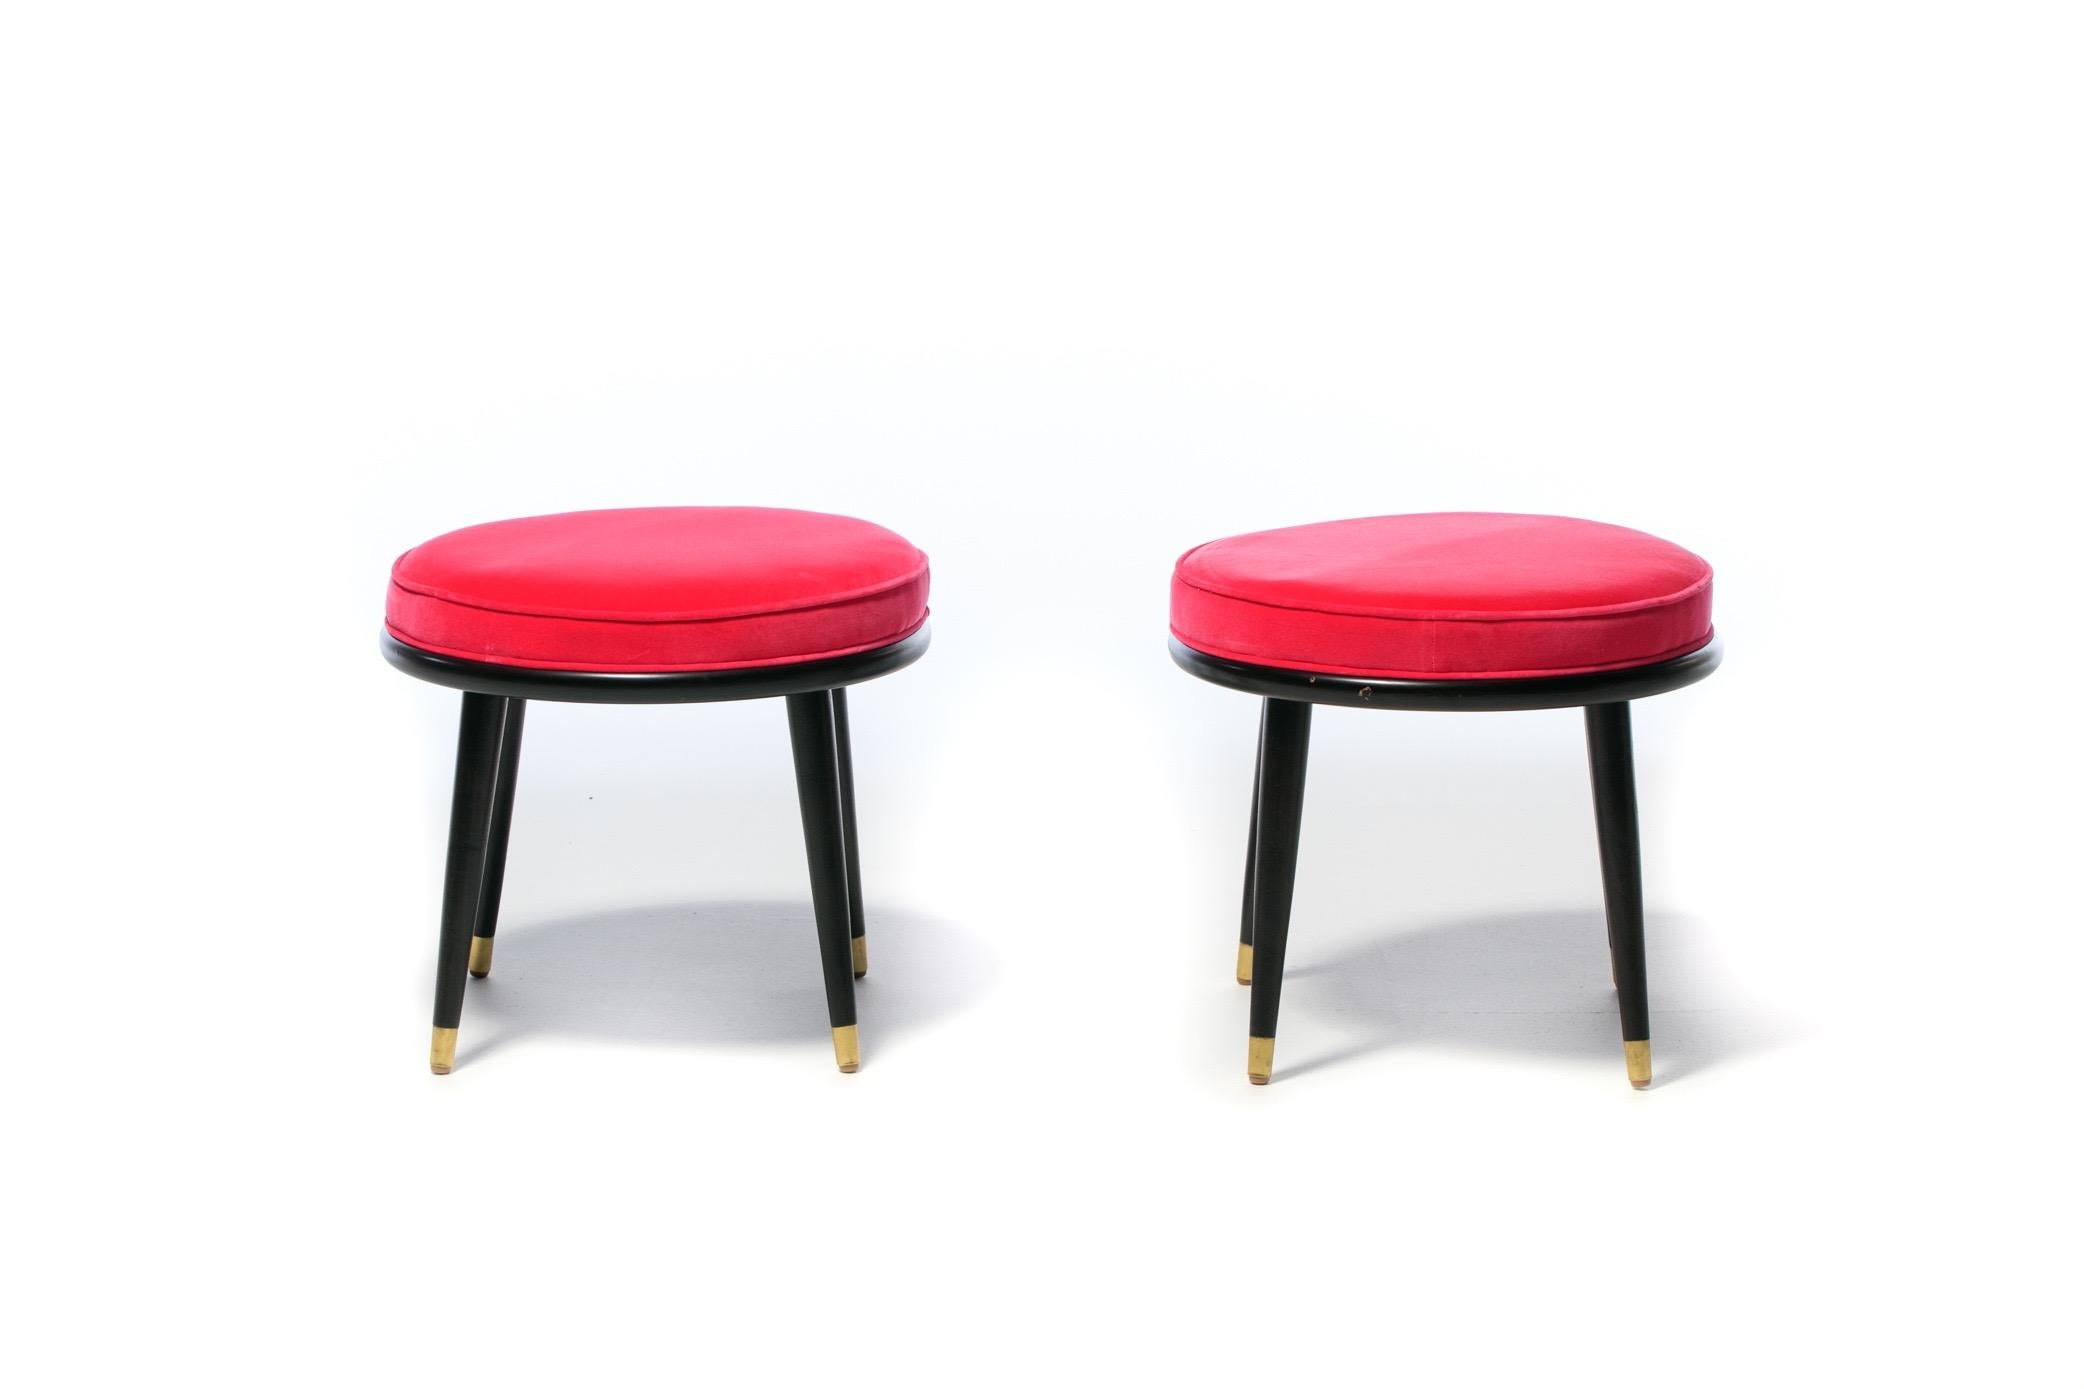 Pair of mid century round stools with tapered dark walnut legs and brass sabots. Hot pink velvet upholstery. A color associated with fashion designer Schiaparelli's signature Shocking Pink. Useful size that could be placed fireside or floating in a